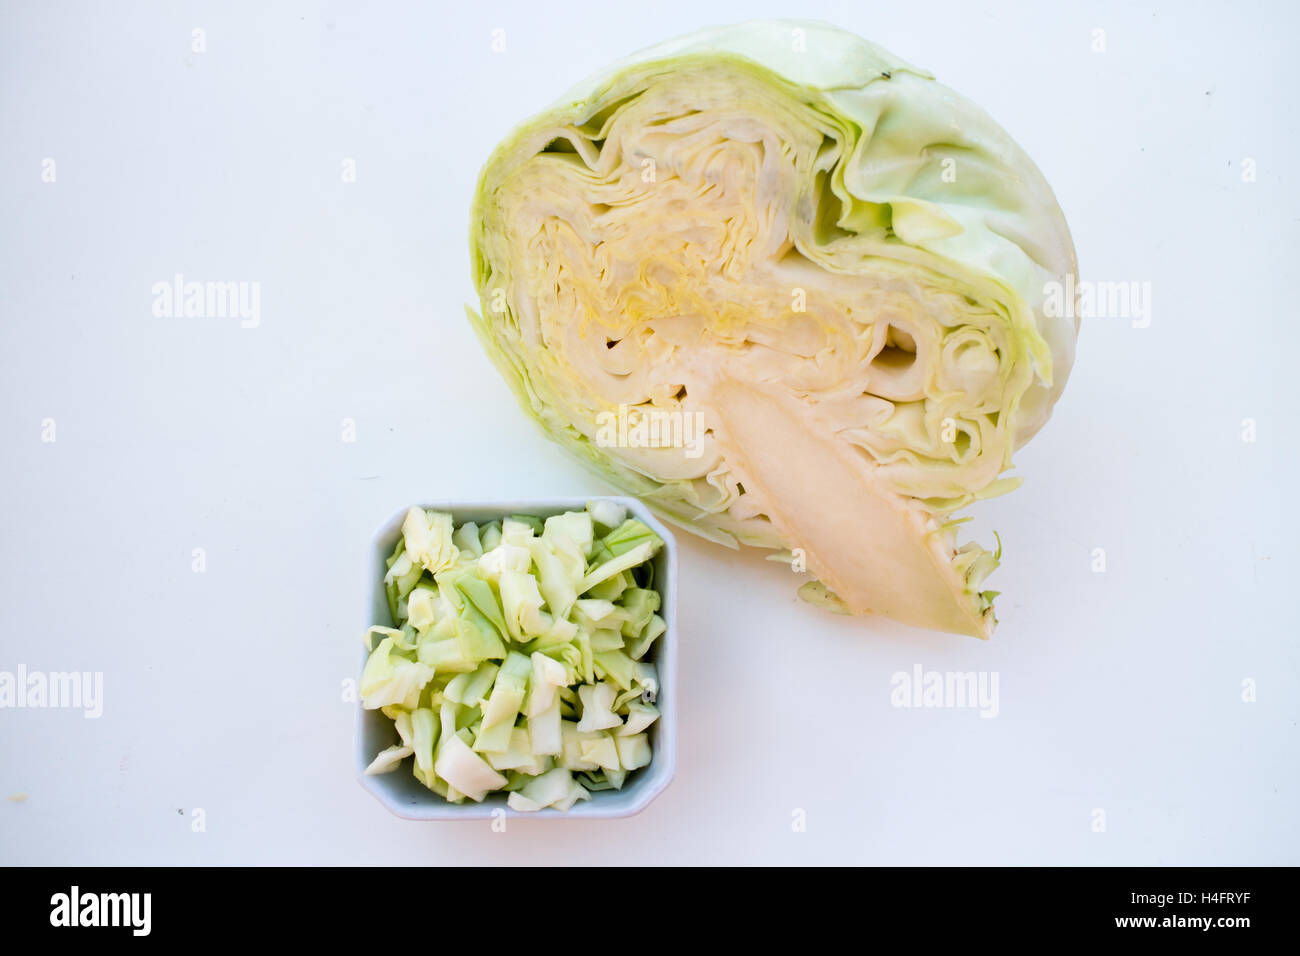 Green cabbage cut up and sliced ready for your kitchen to cook, farm inspired Stock Photo